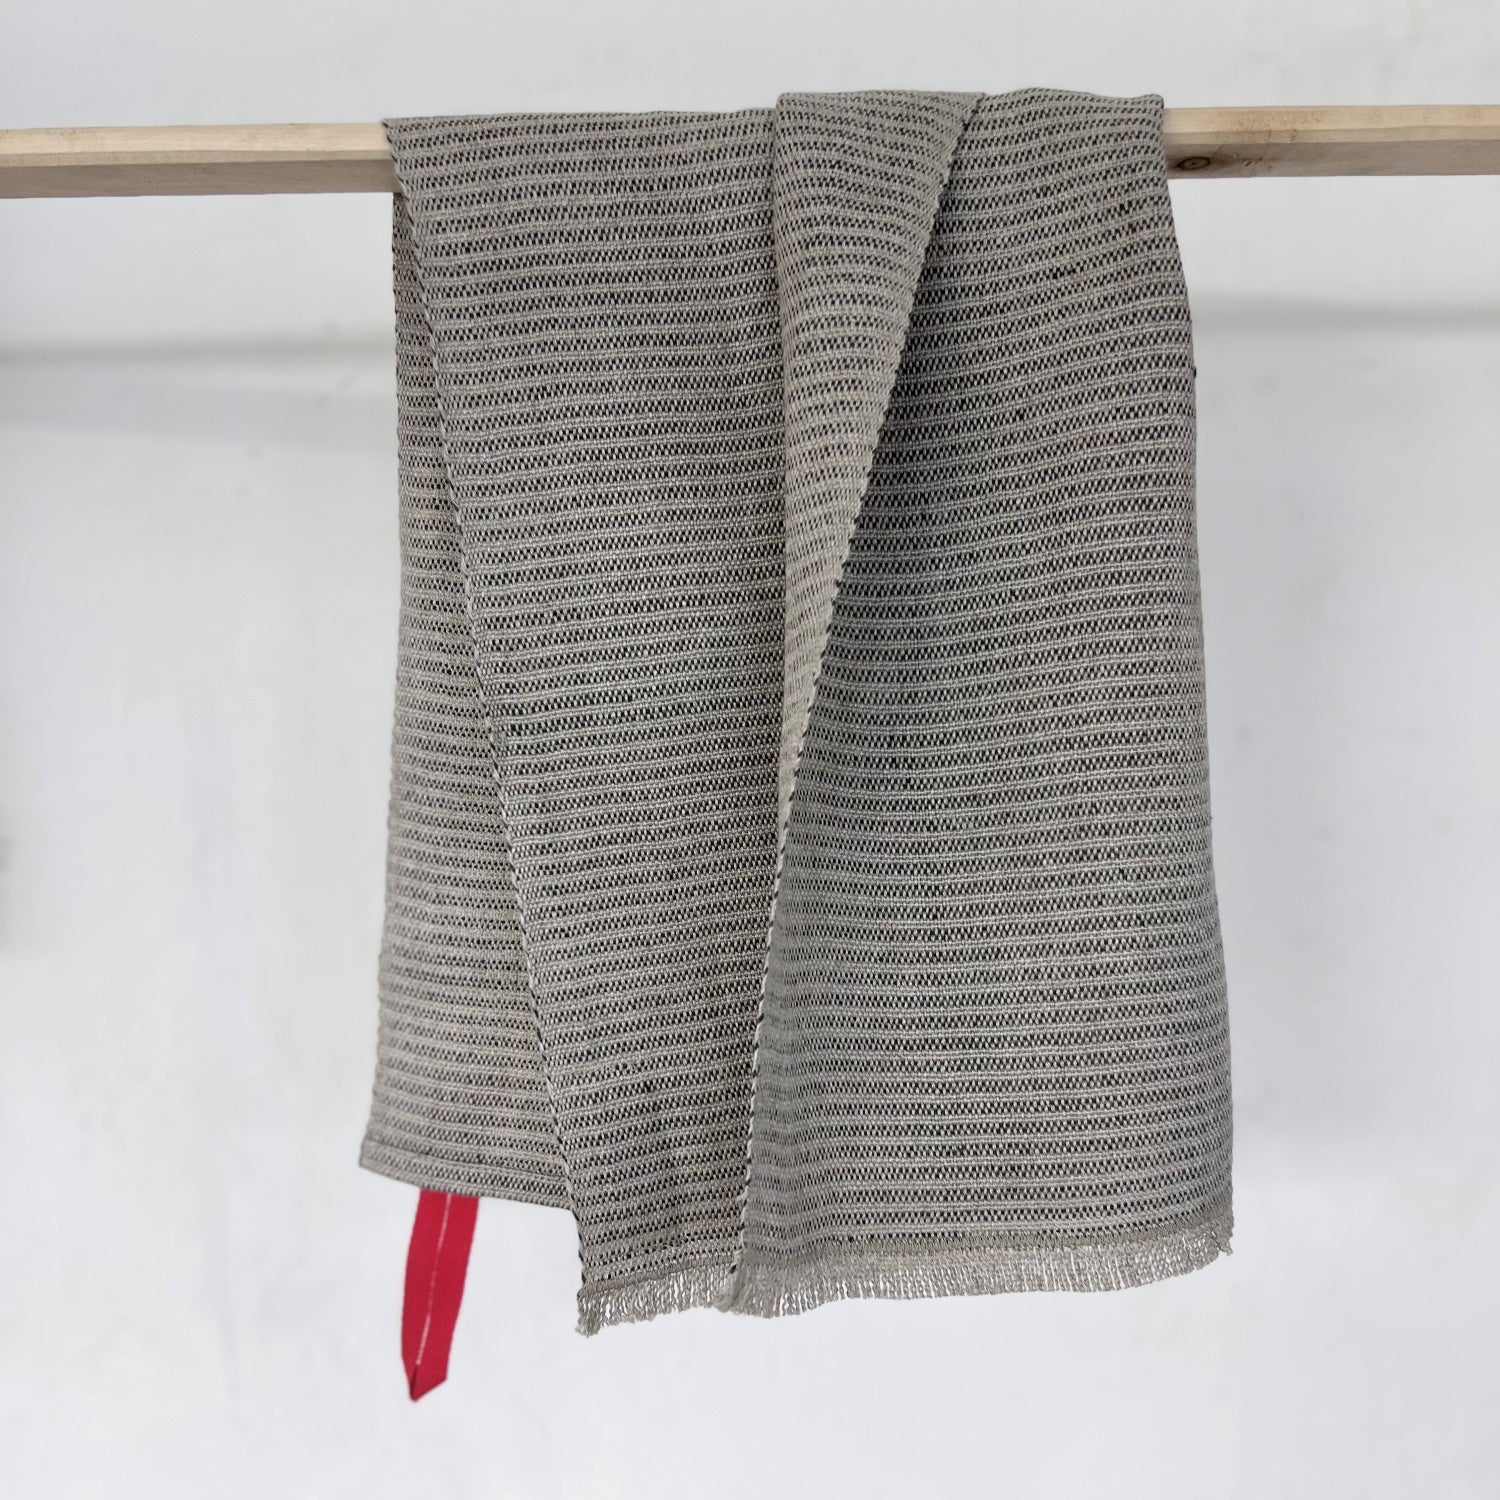 Handwoven linen kitchen towel in natural 40x70 cm with a red hanging loop